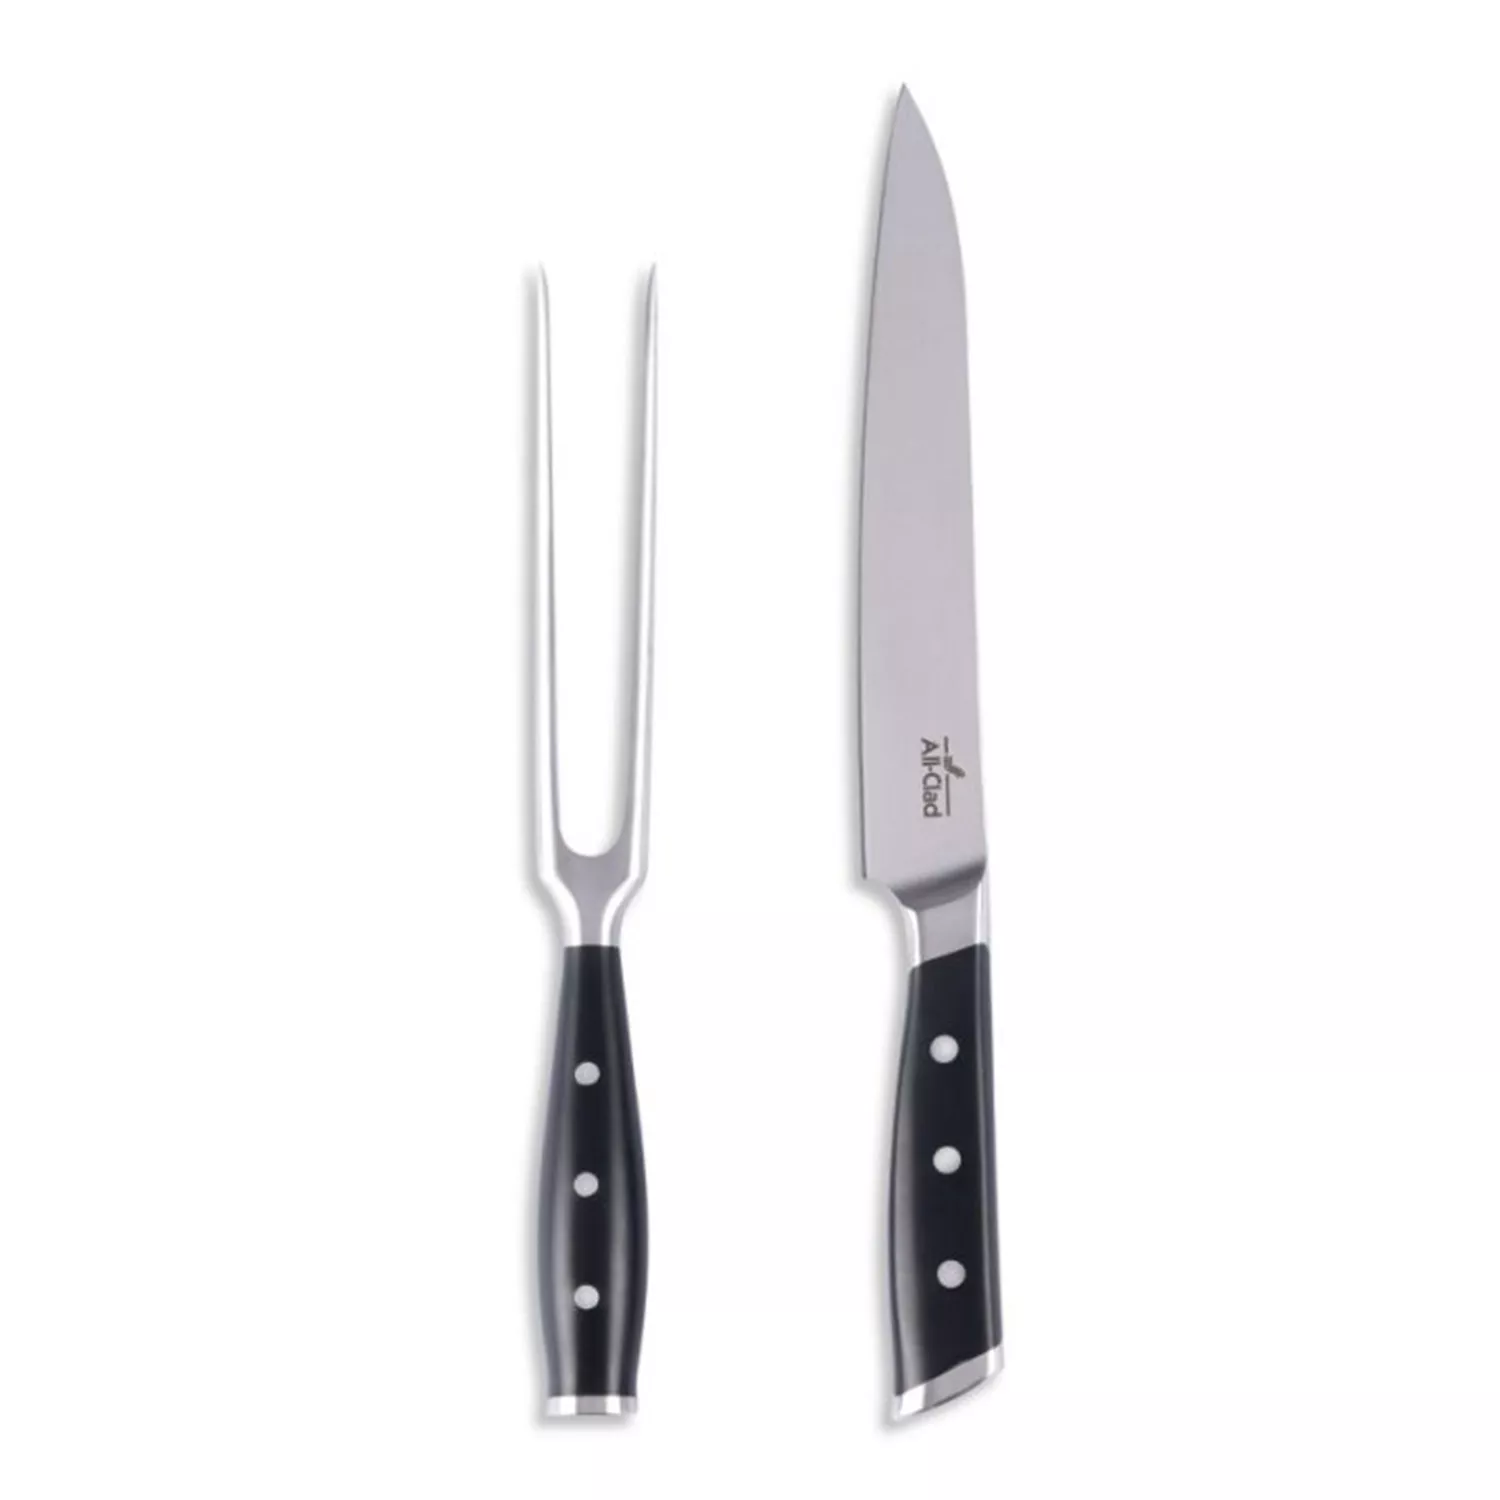 All-Clad 2-Piece Carving Set